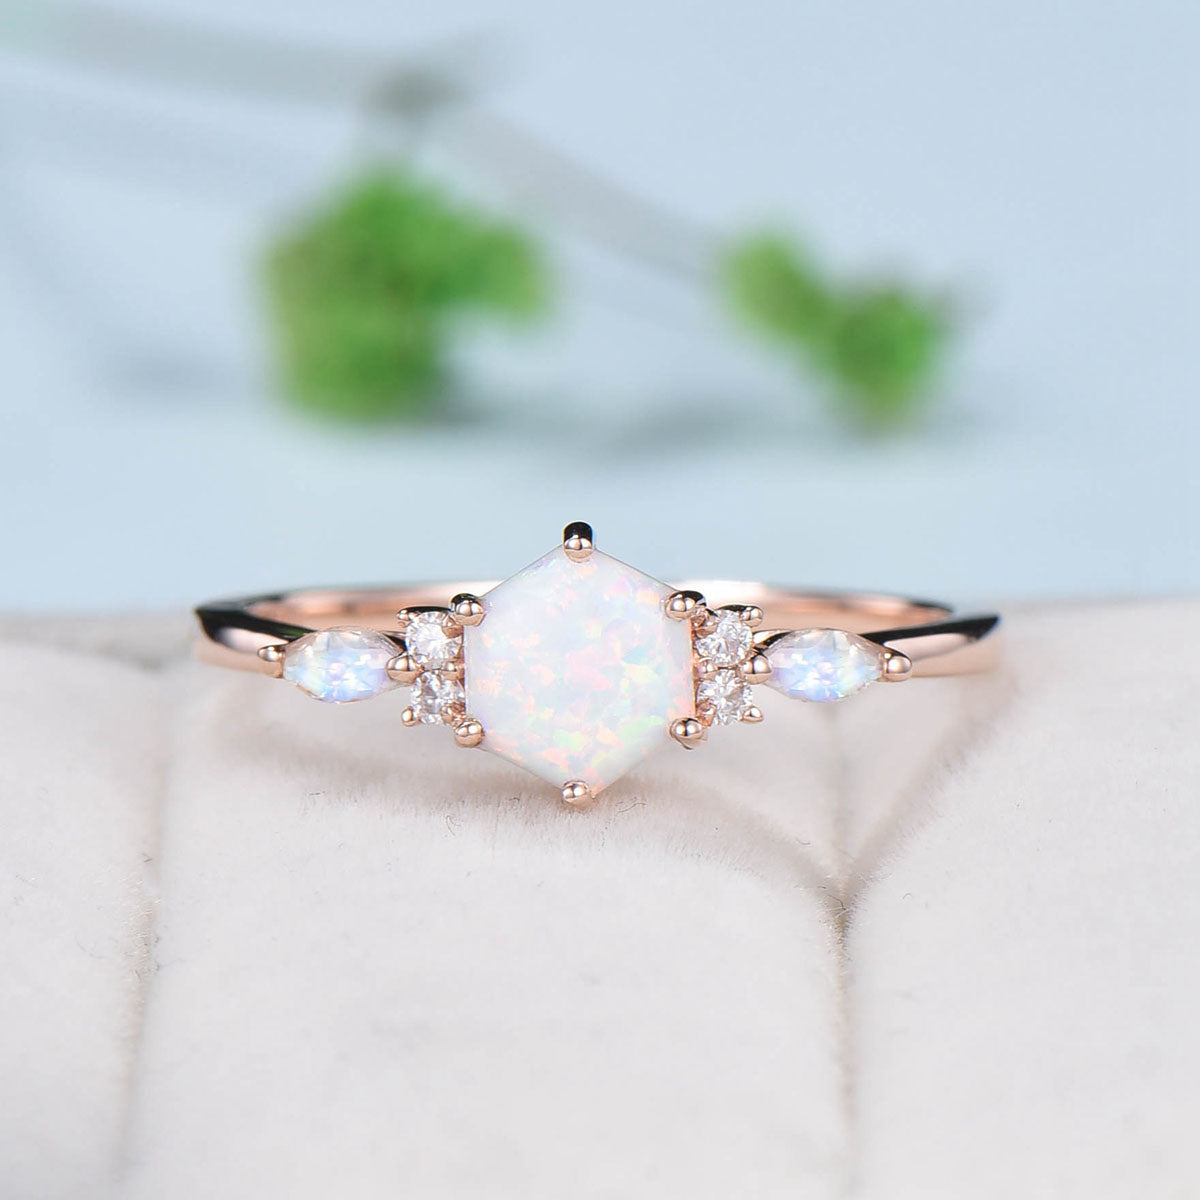 Hexagon Cut Opal Ring For Women Elegant Opal Engagement Ring Gold Art Deco Marquise Moonstone Wedding Ring Unique Cluster Moissanite Ring - PENFINE